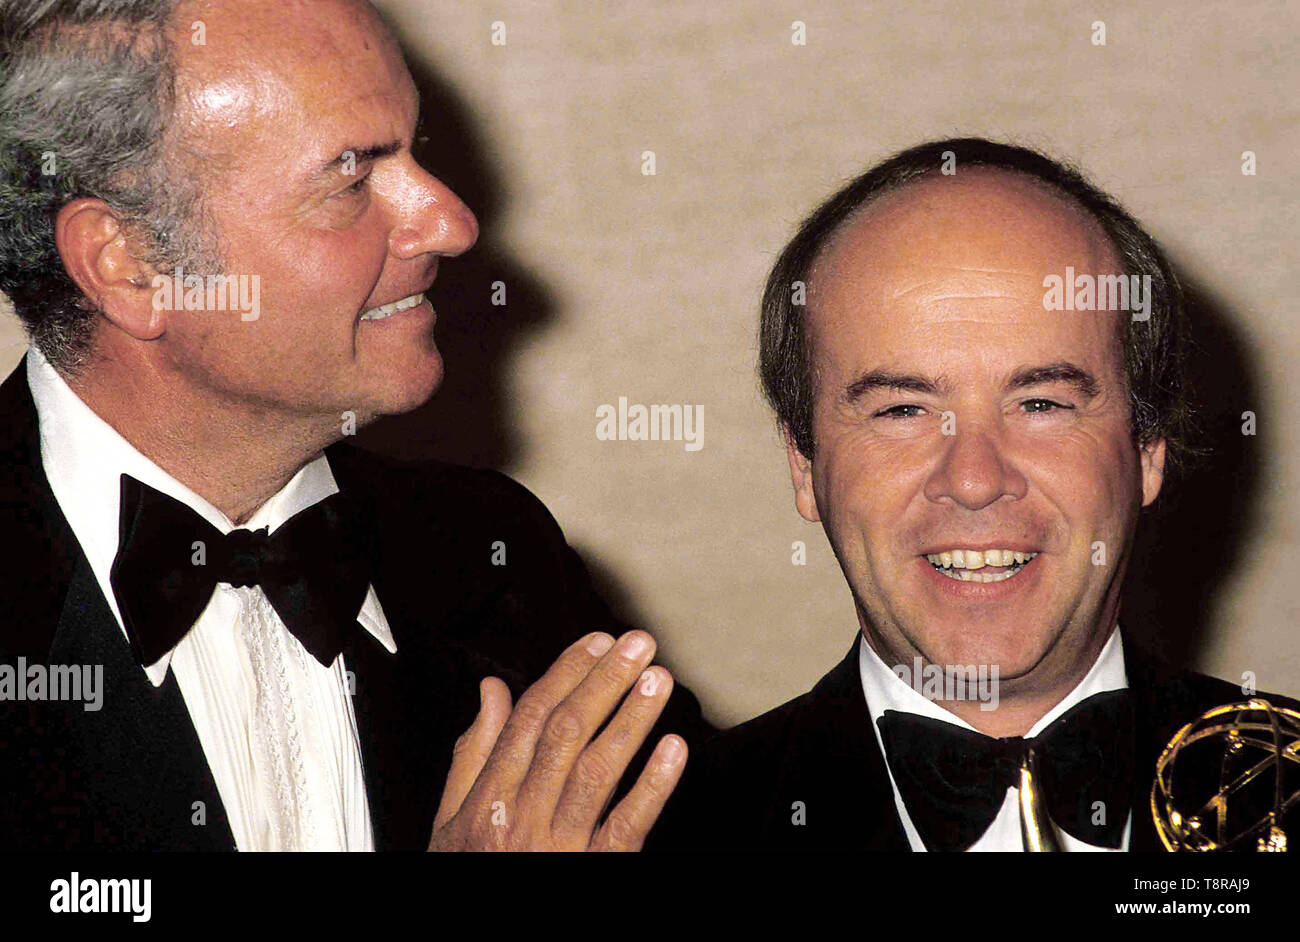 May 14, 2019: Los Angeles, California USA: FILE: Actor and comedian TIM CONWAY, best known for his Emmy winning work on 'The Carol Burnett Show,' died on Tuesday morning. He was 85. PICTURED: TIM CONWAY and HARVEY KORMAN in the Press Room during the 1978 Emmy Awards. (Credit Image: © Bob NobleGlobe Photos/ZUMAPRESS.com) Stock Photo